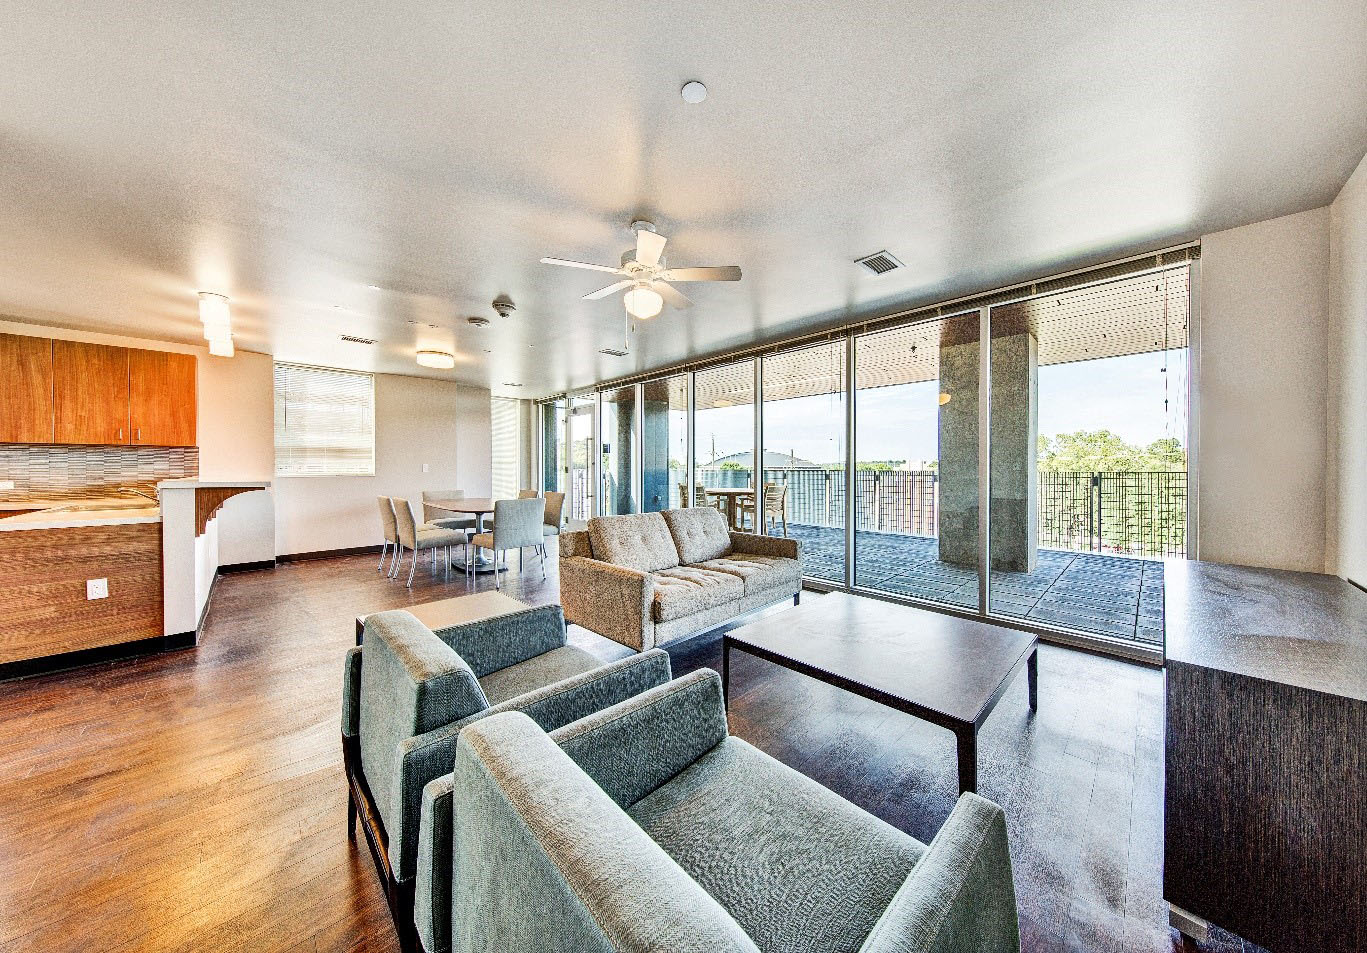 Faculty-in-Residence Living - Living Space